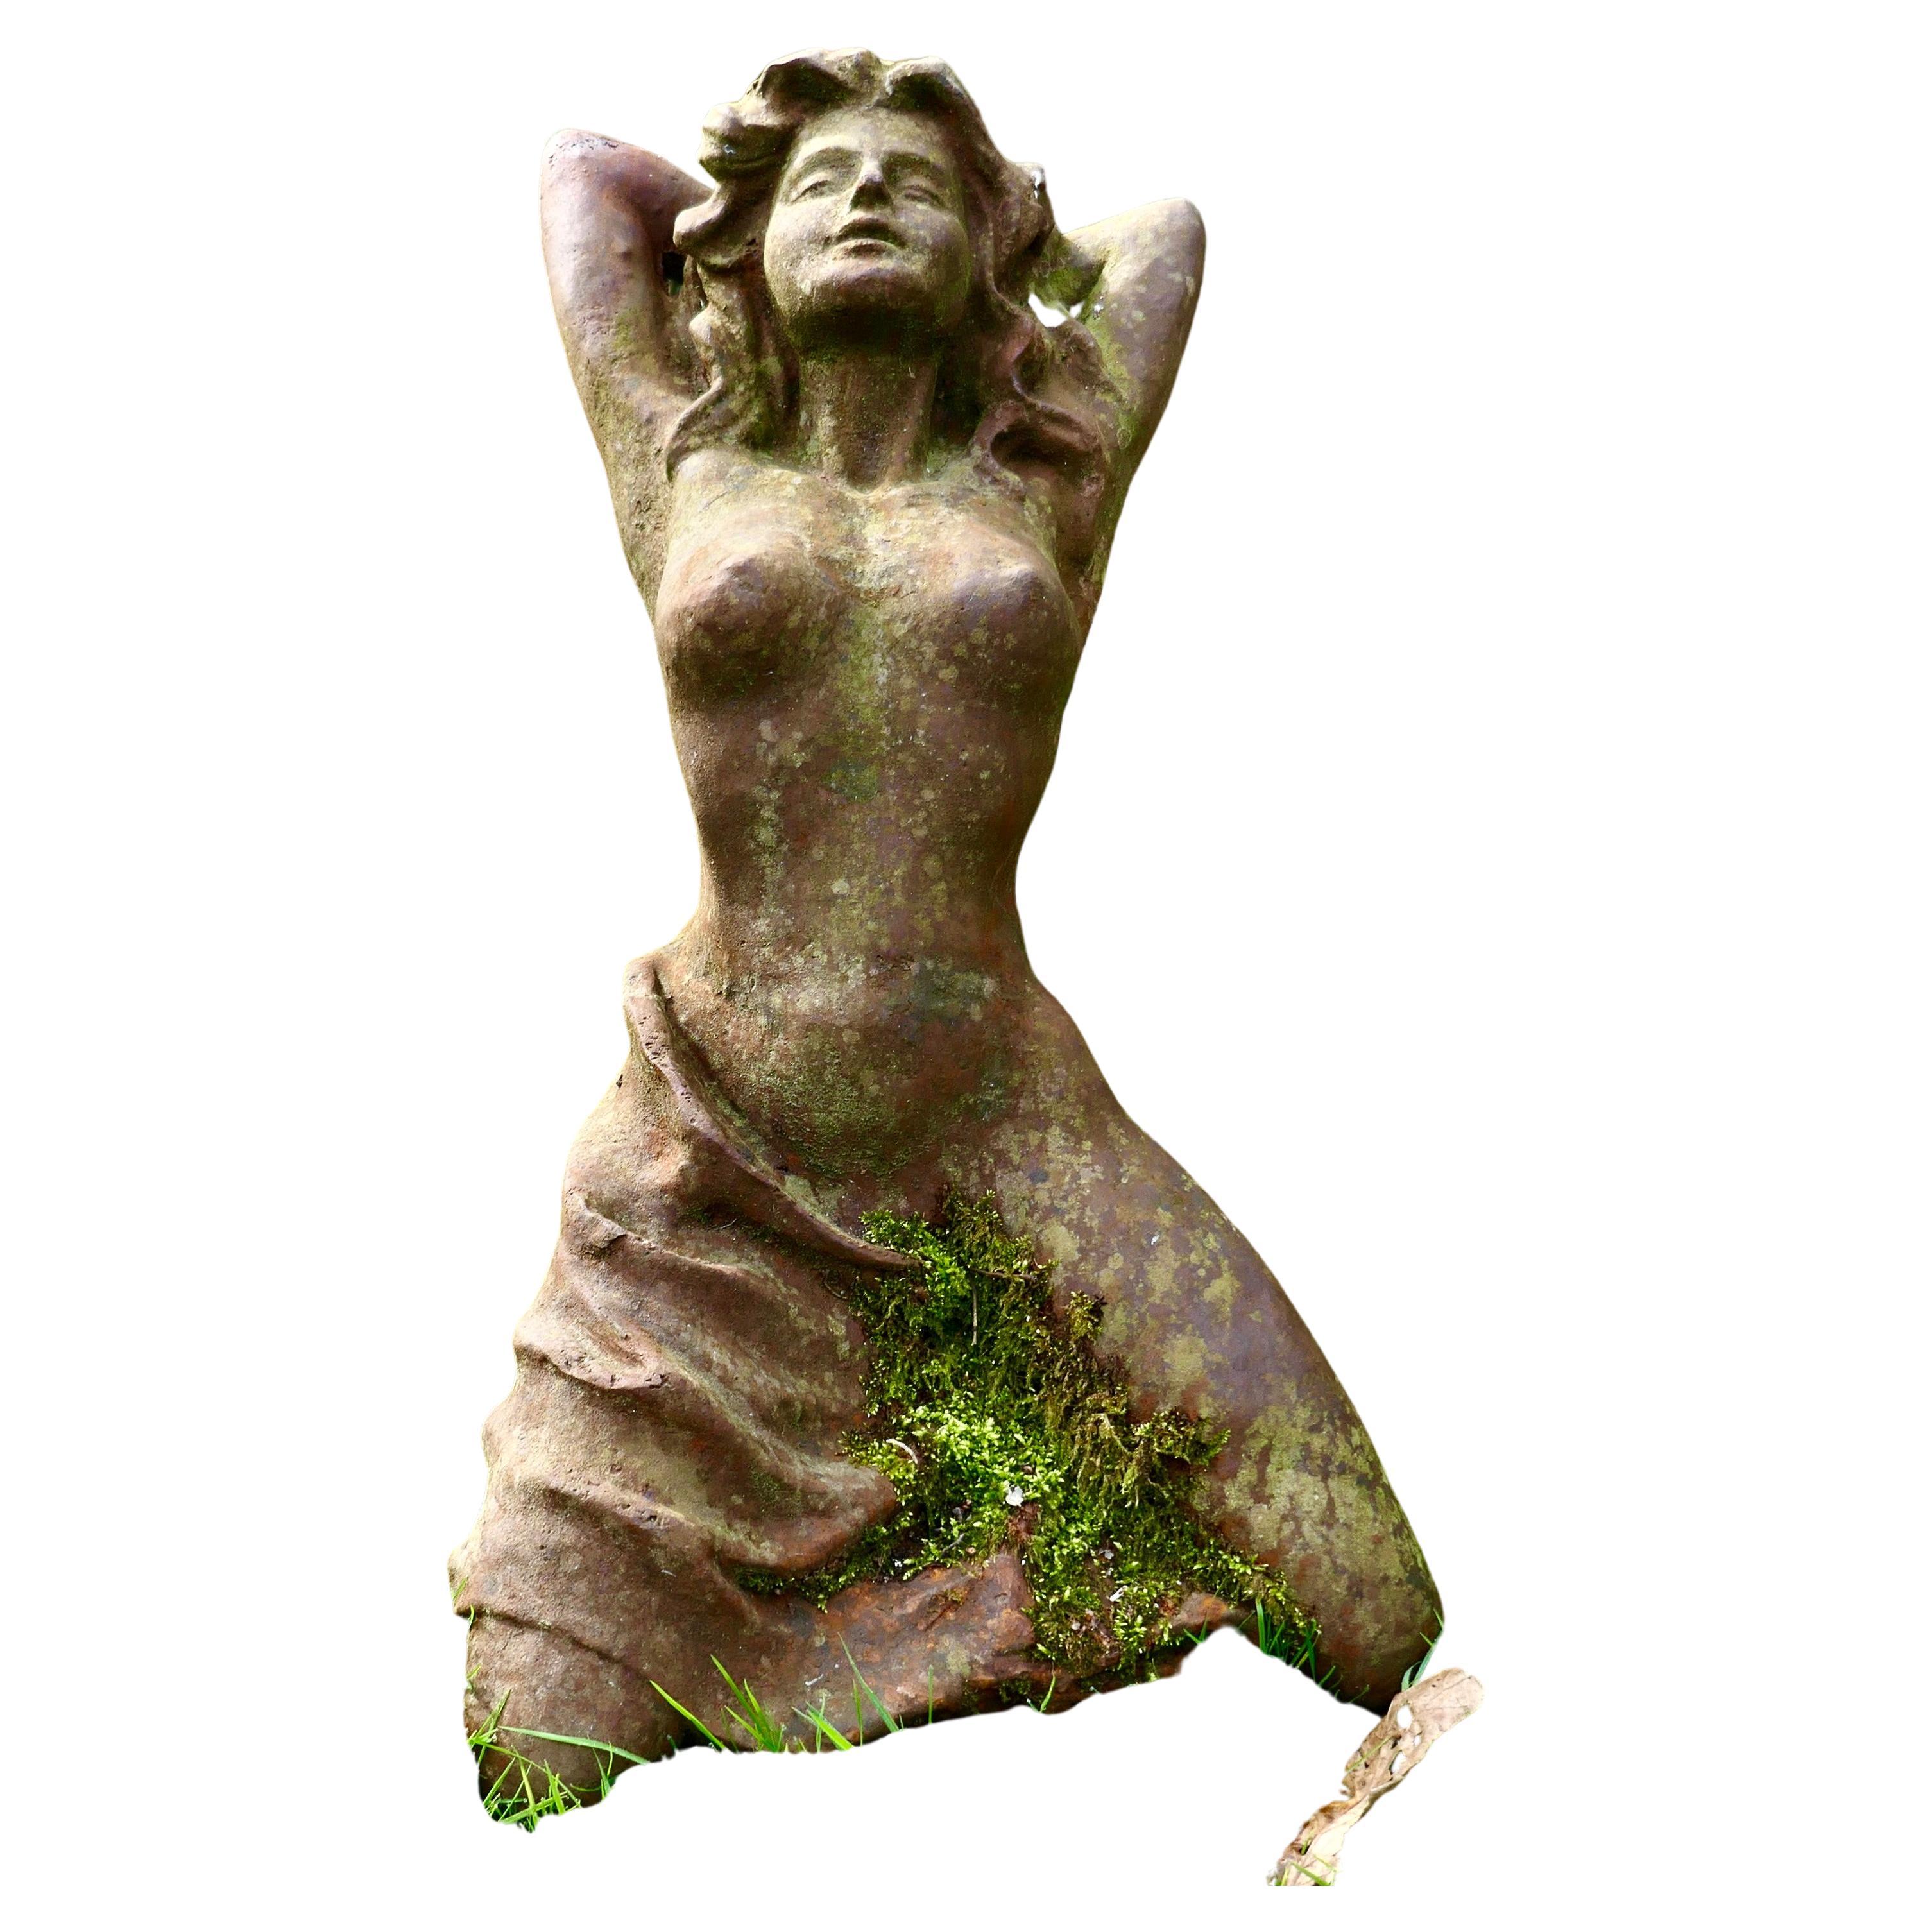 Weathered Female Statue of a Nude Figure “Shameless” For Sale